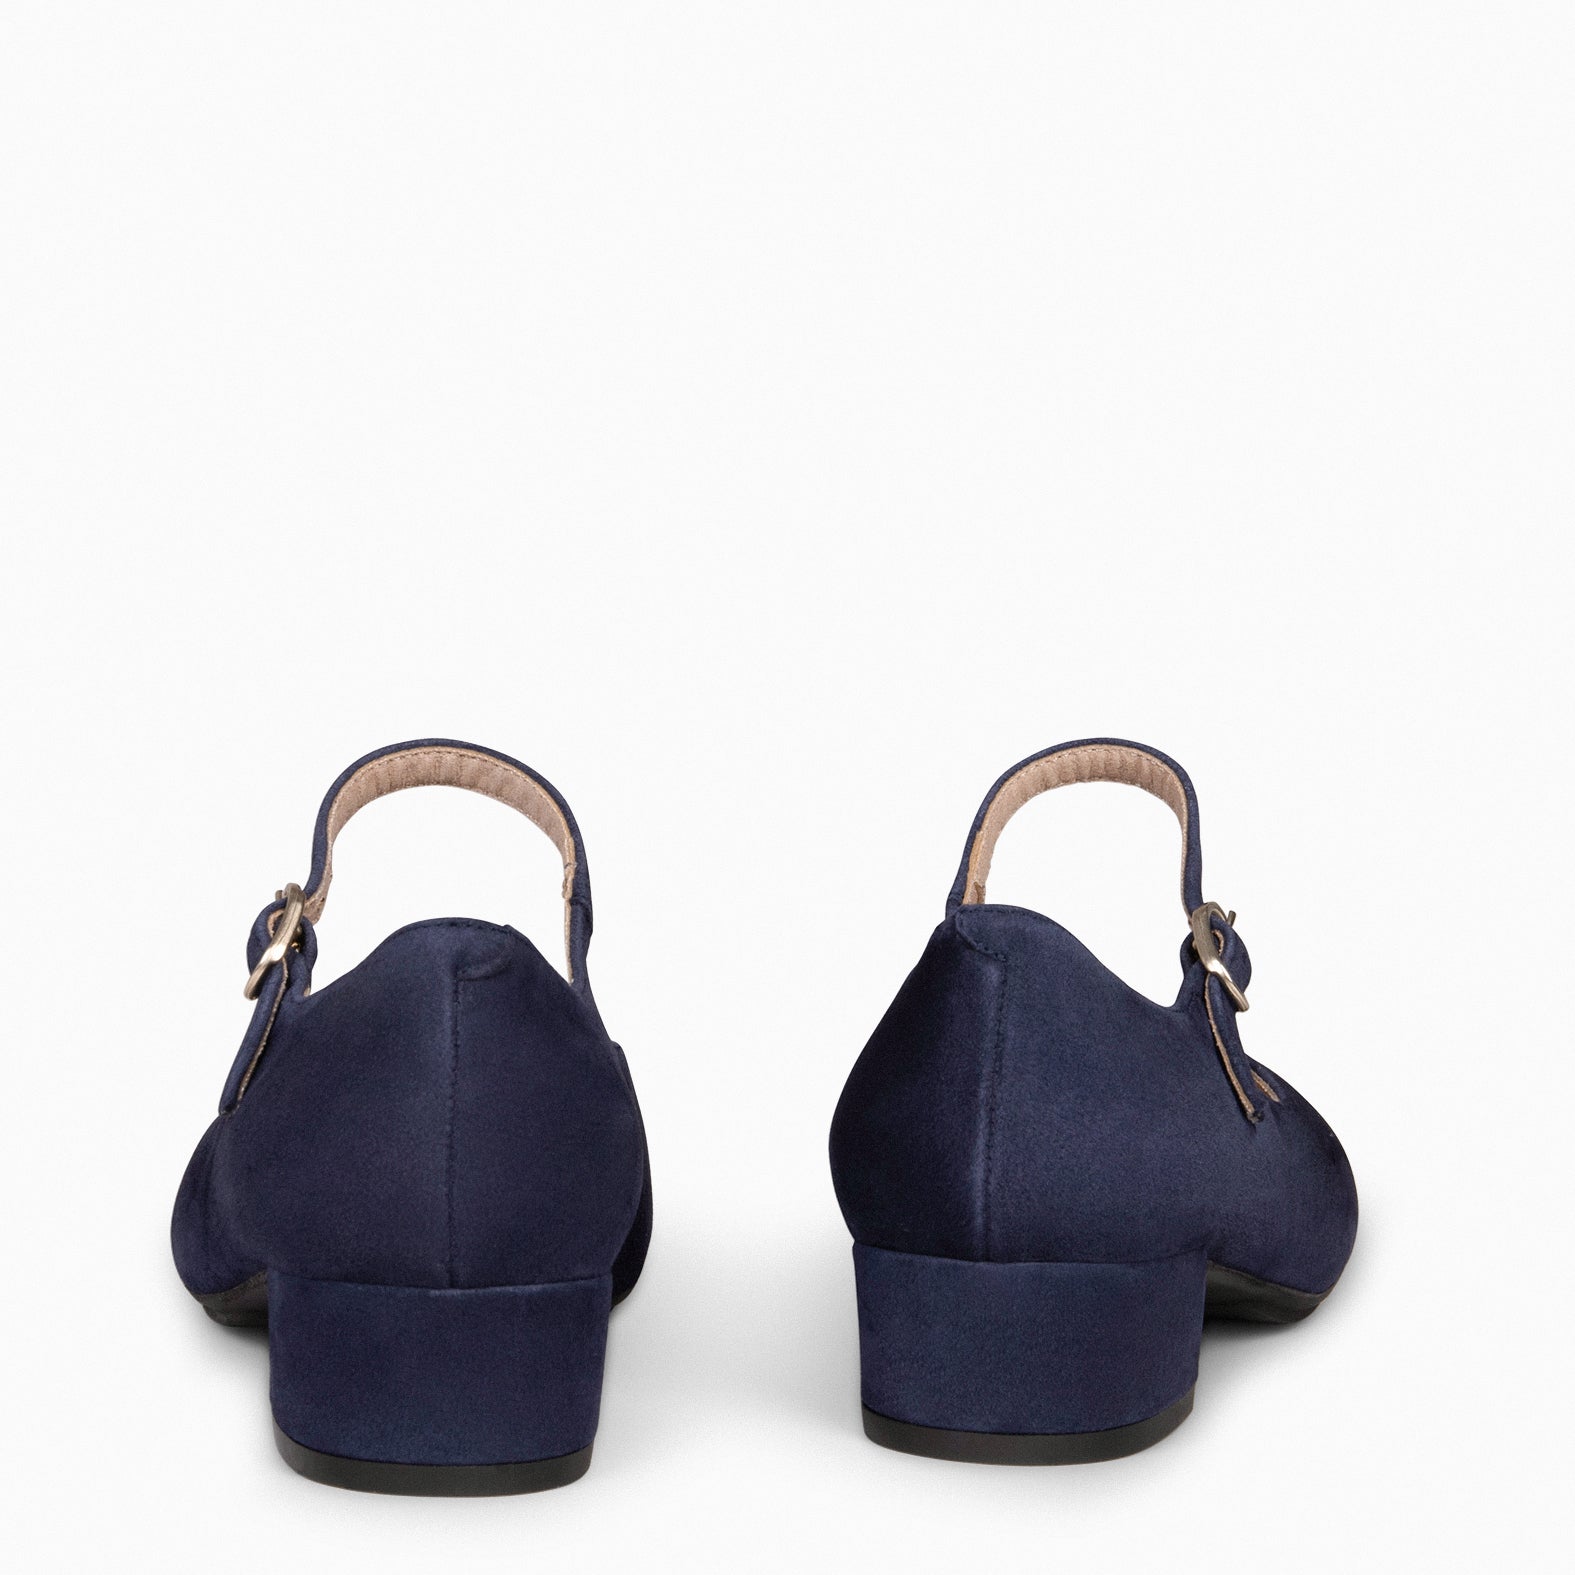 NORA – NAVY Mary-Janes with low heel 